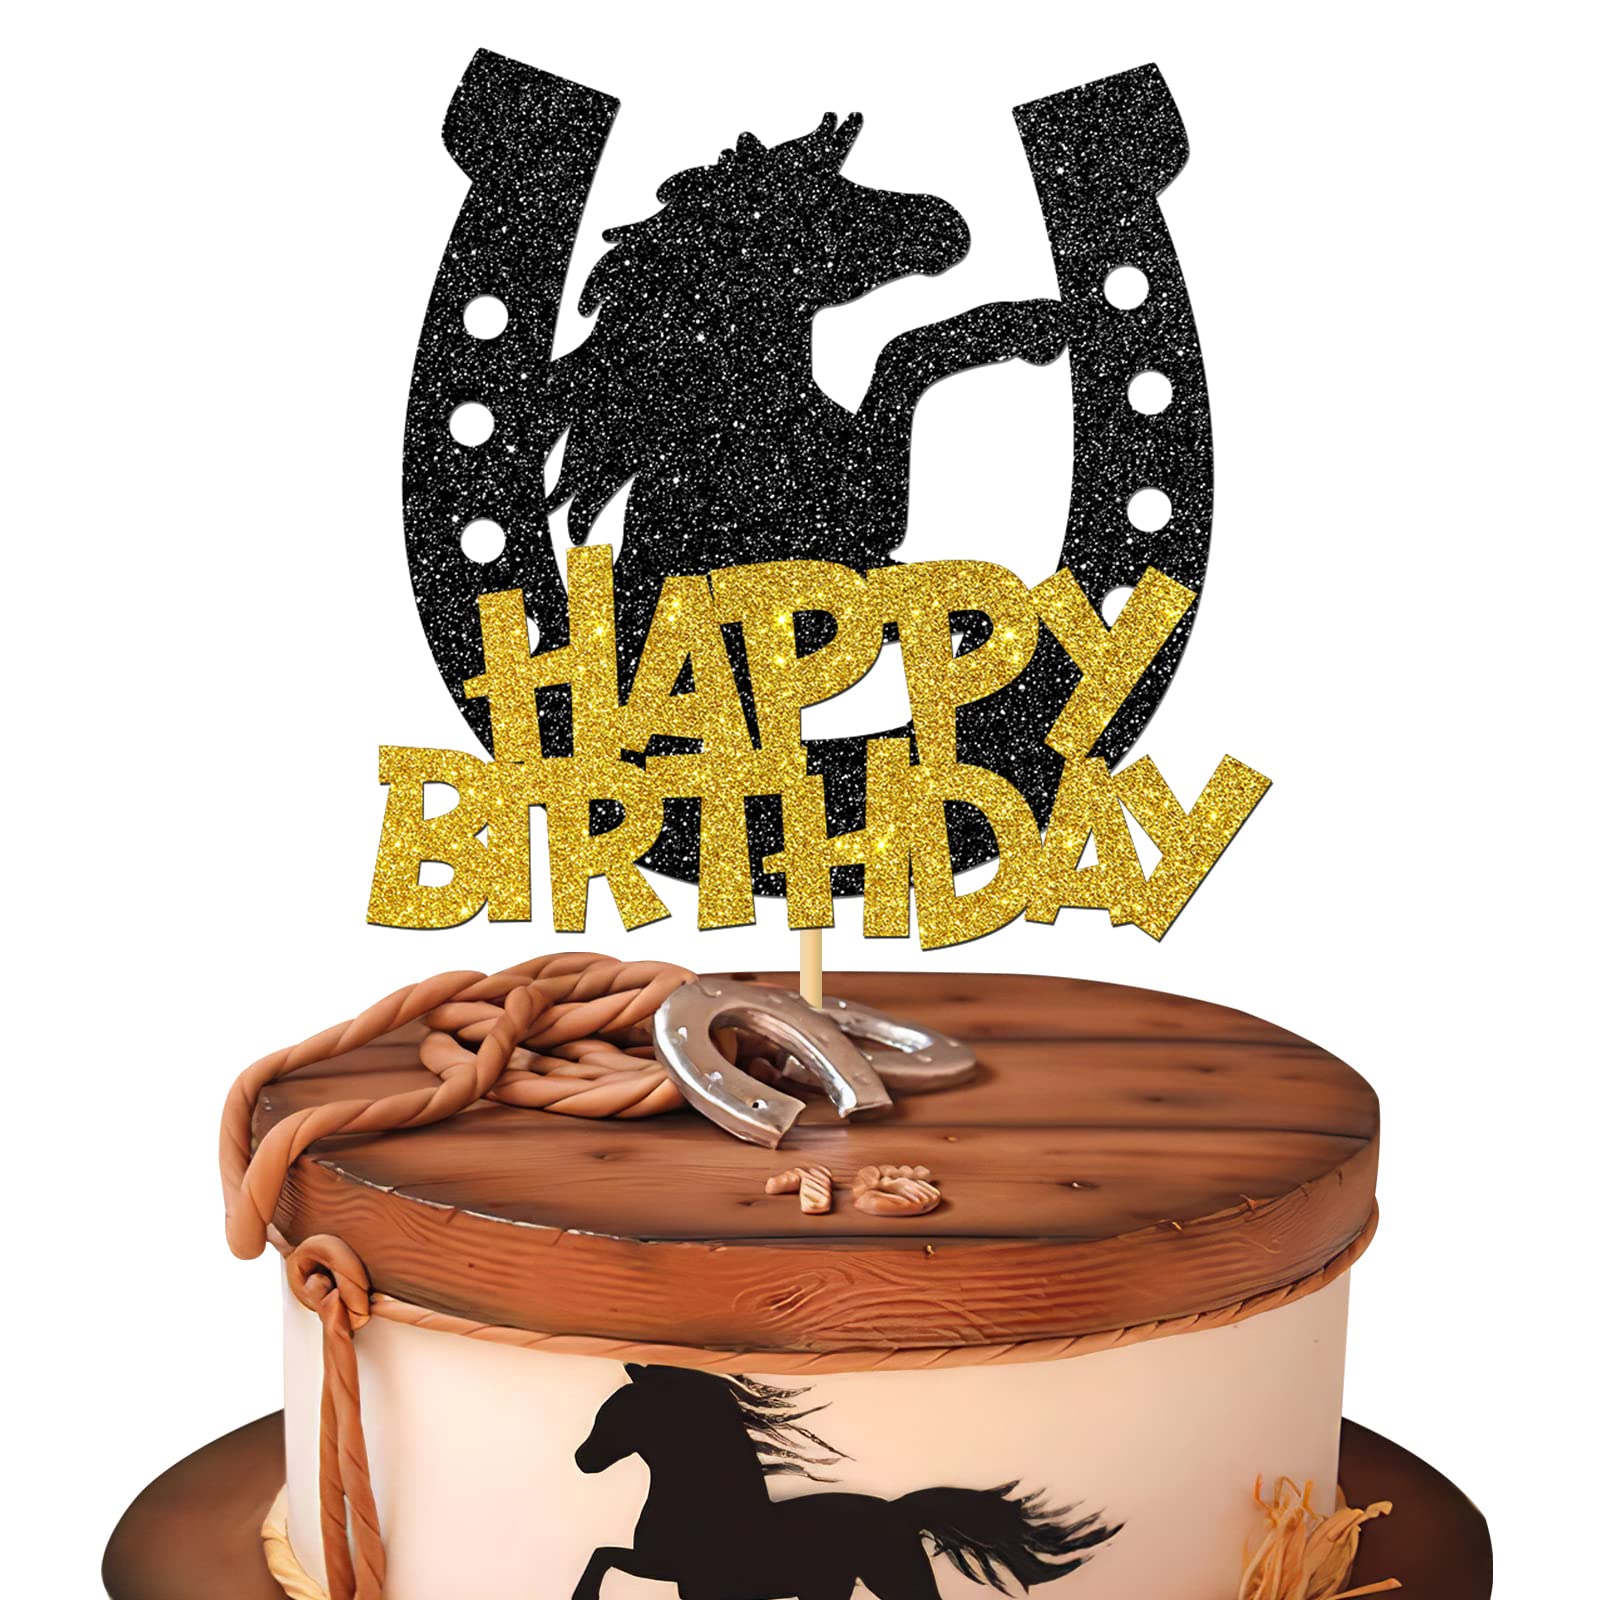 horse themed cakes for adults